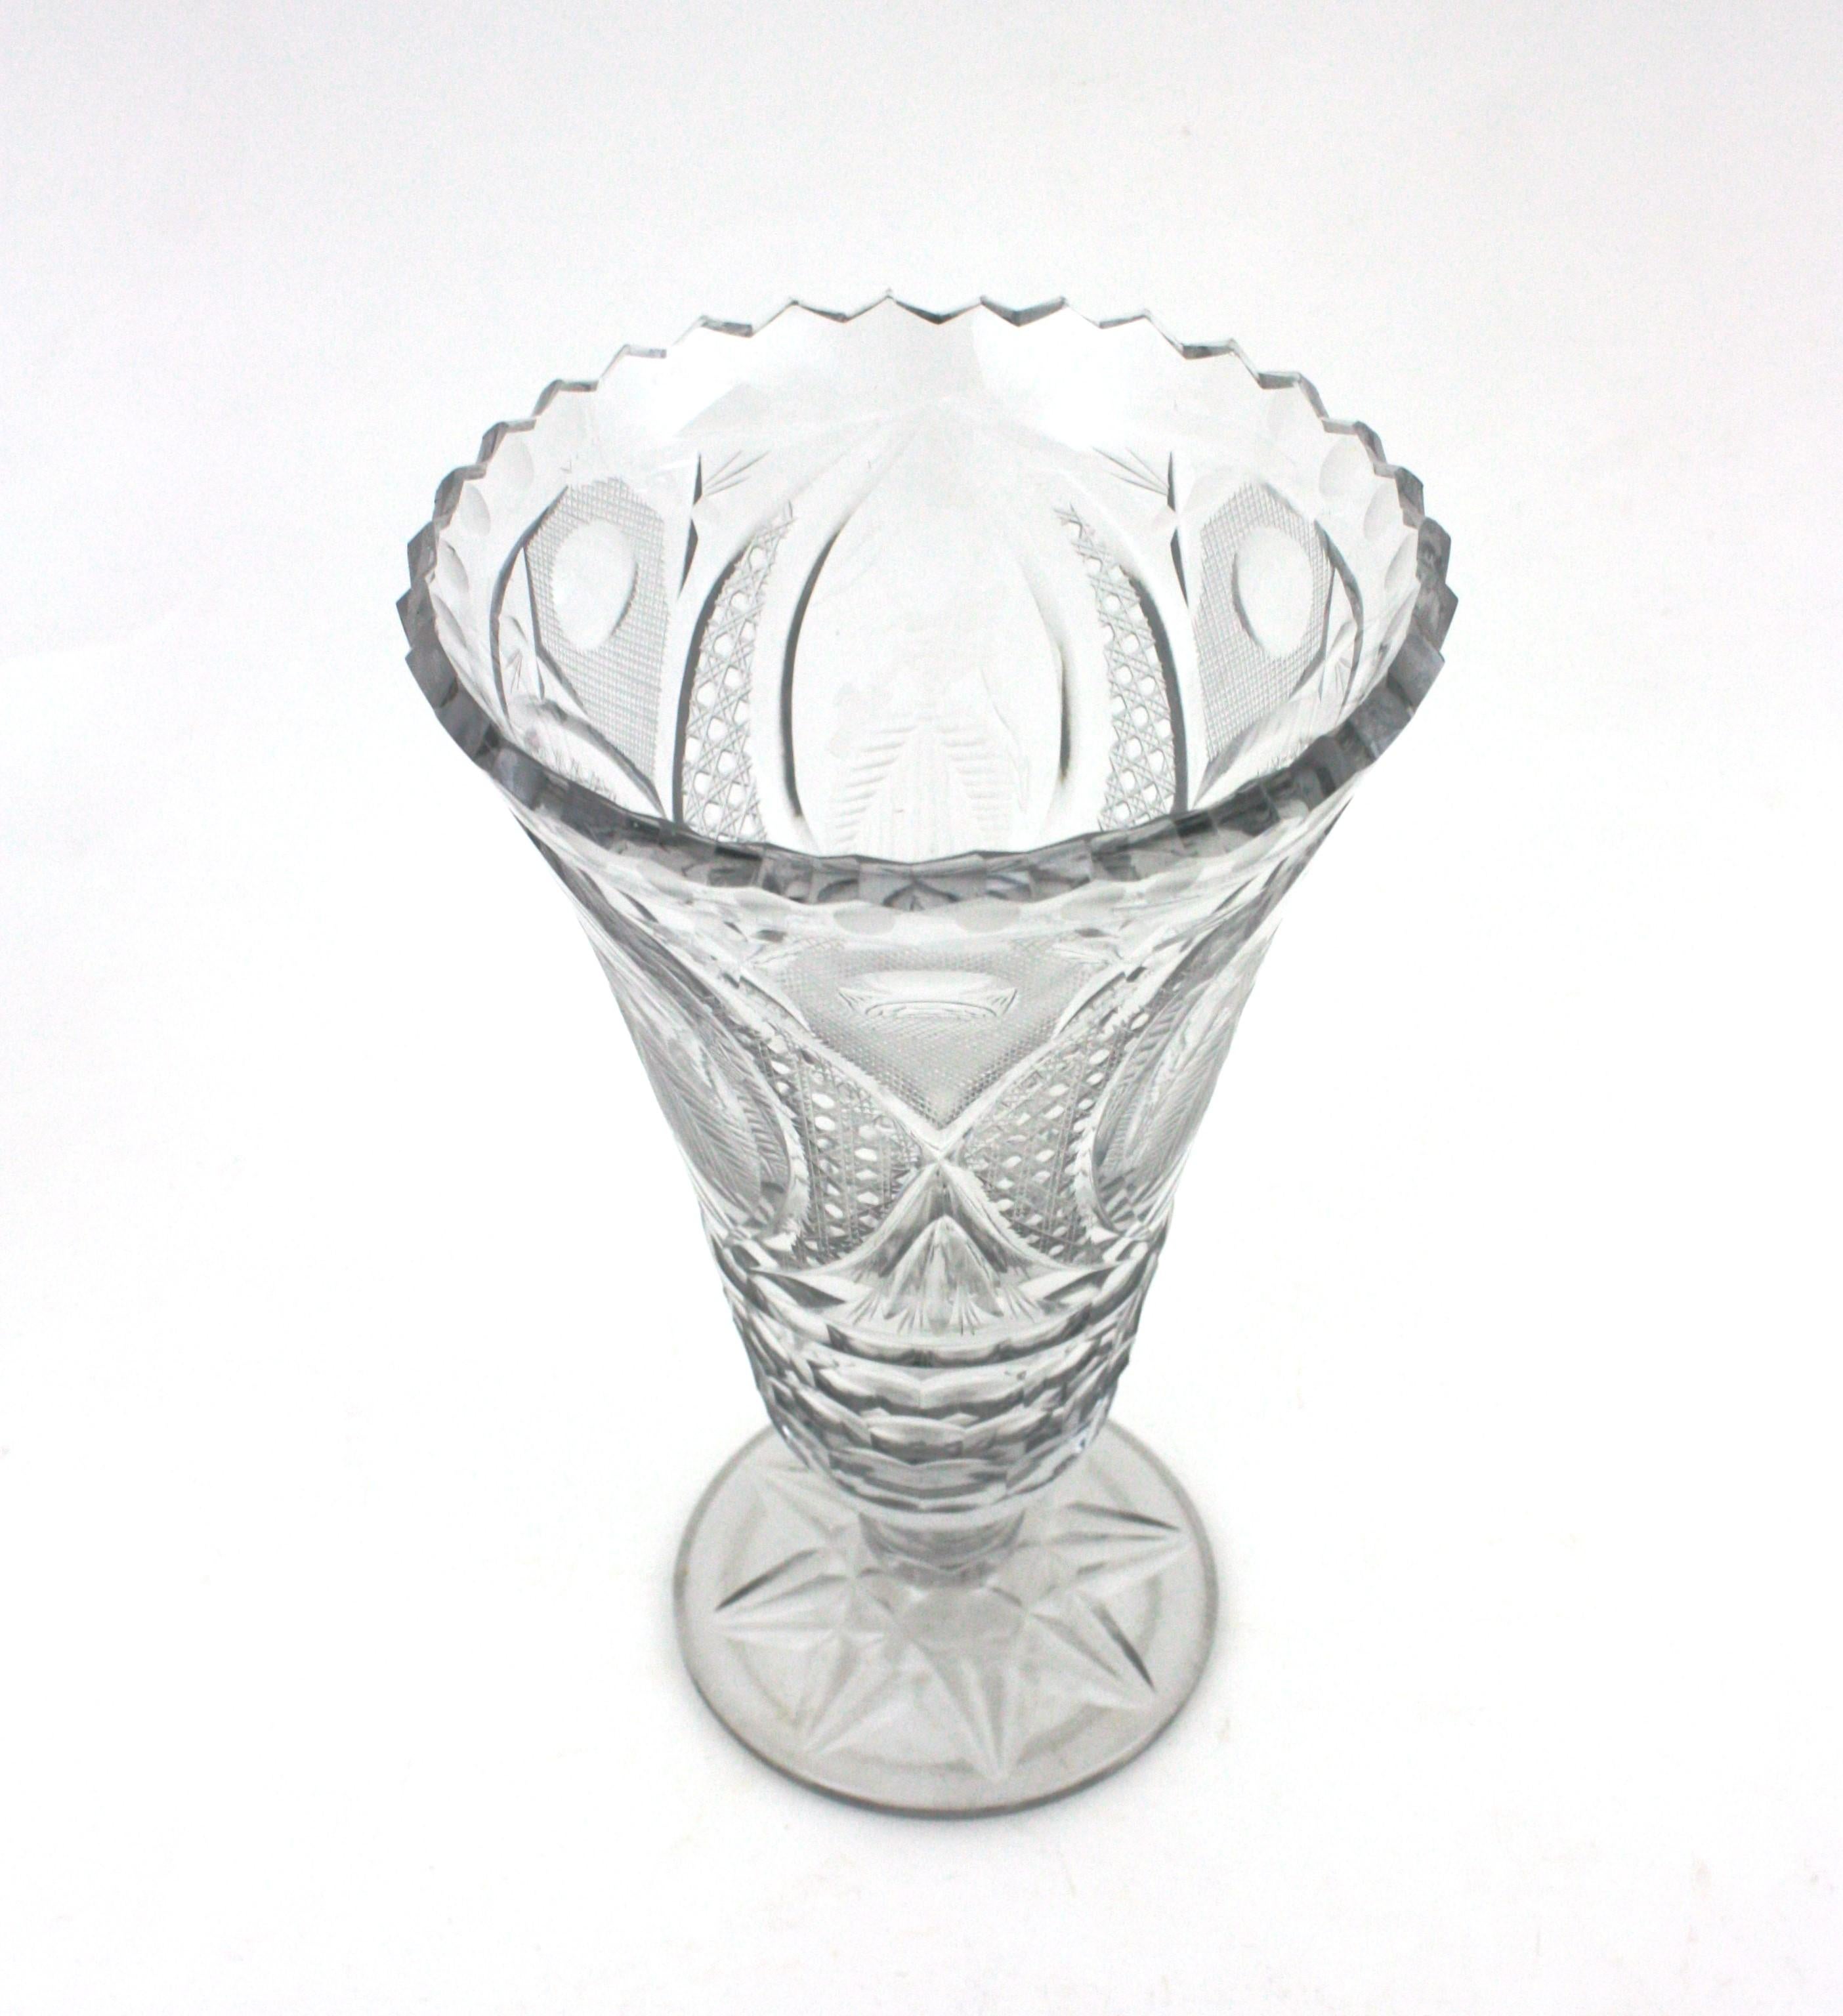 Unmatching Pair of Cut Crystal Vases or Hurricane Candle Holders For Sale 4